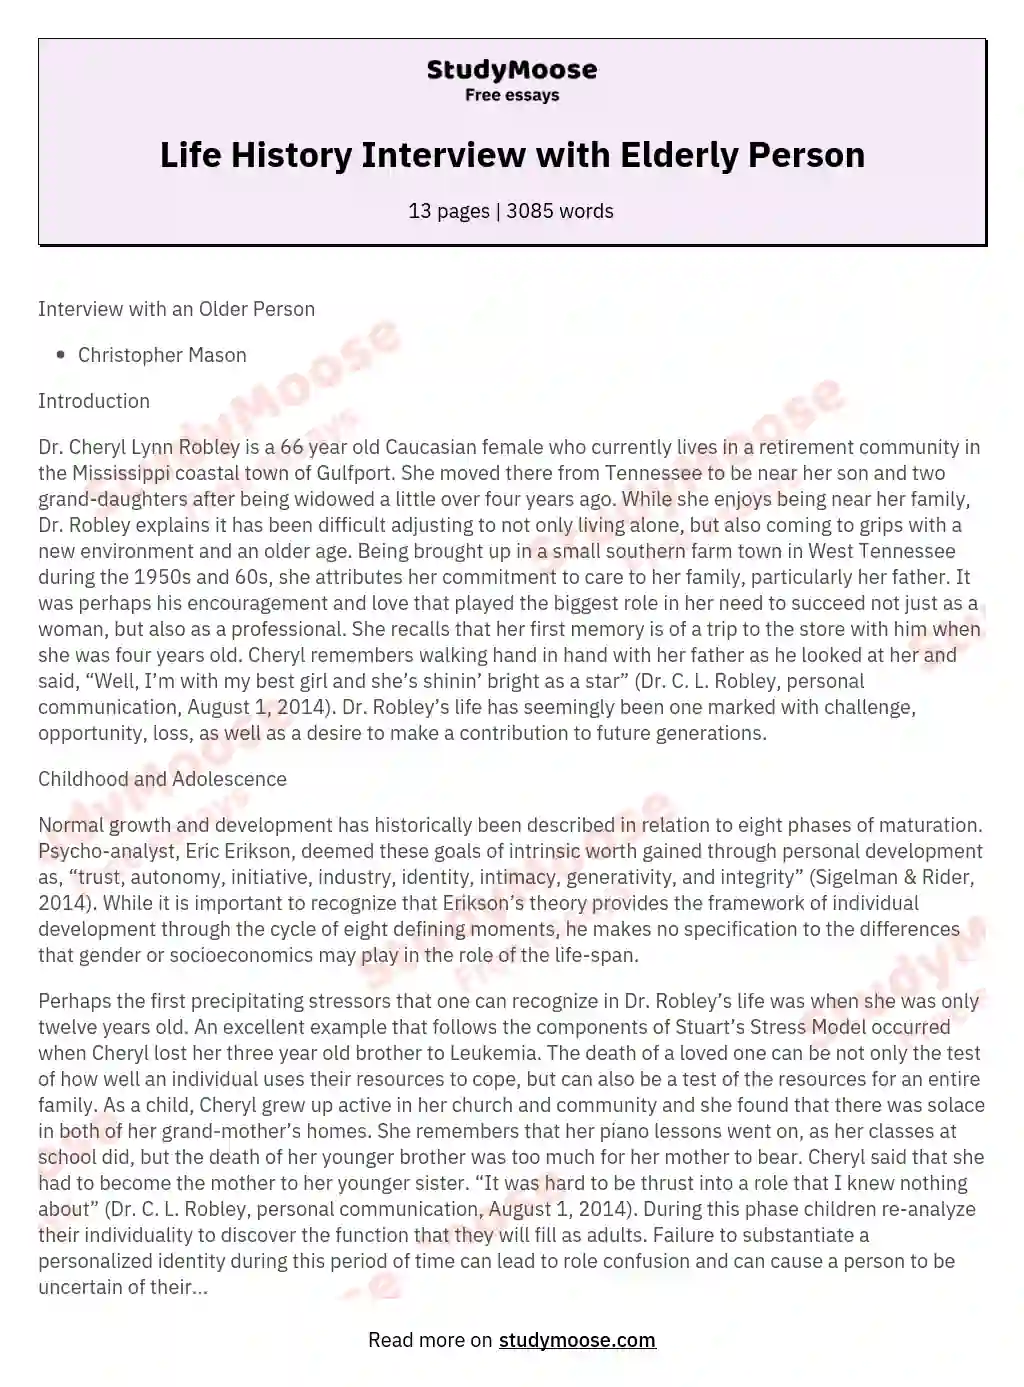 Life History Interview with Elderly Person essay